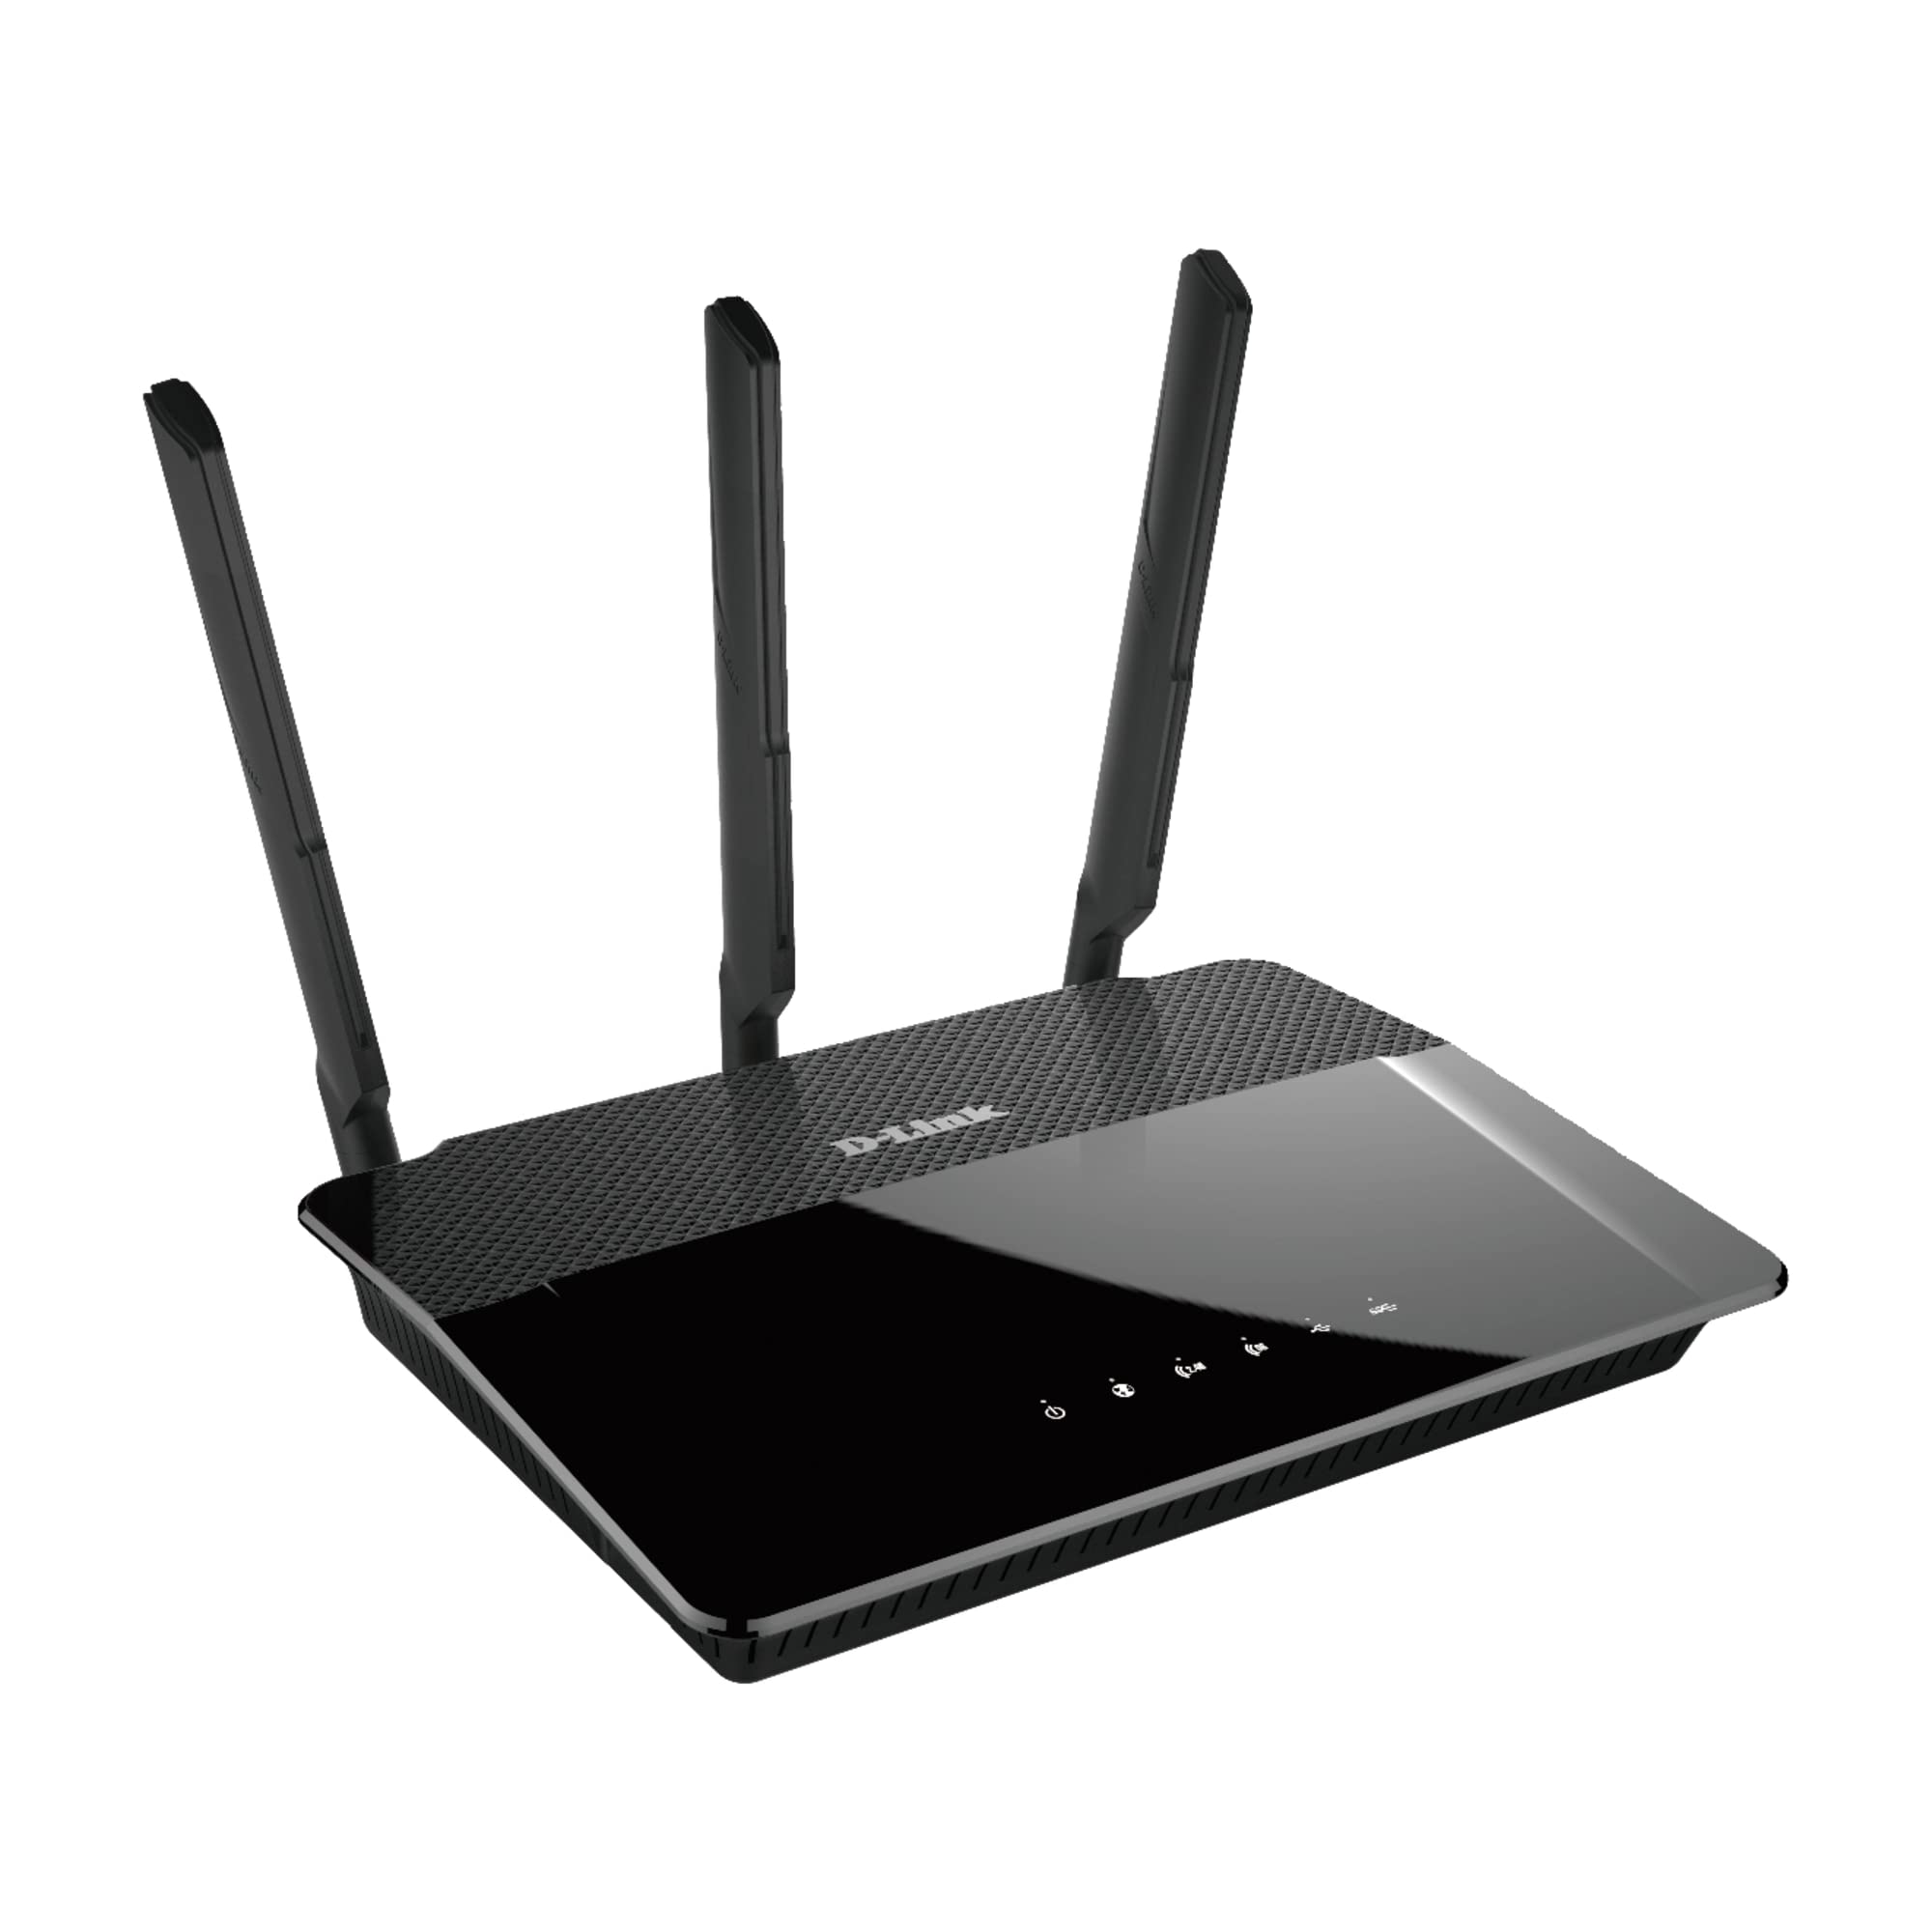 Router with a red X mark